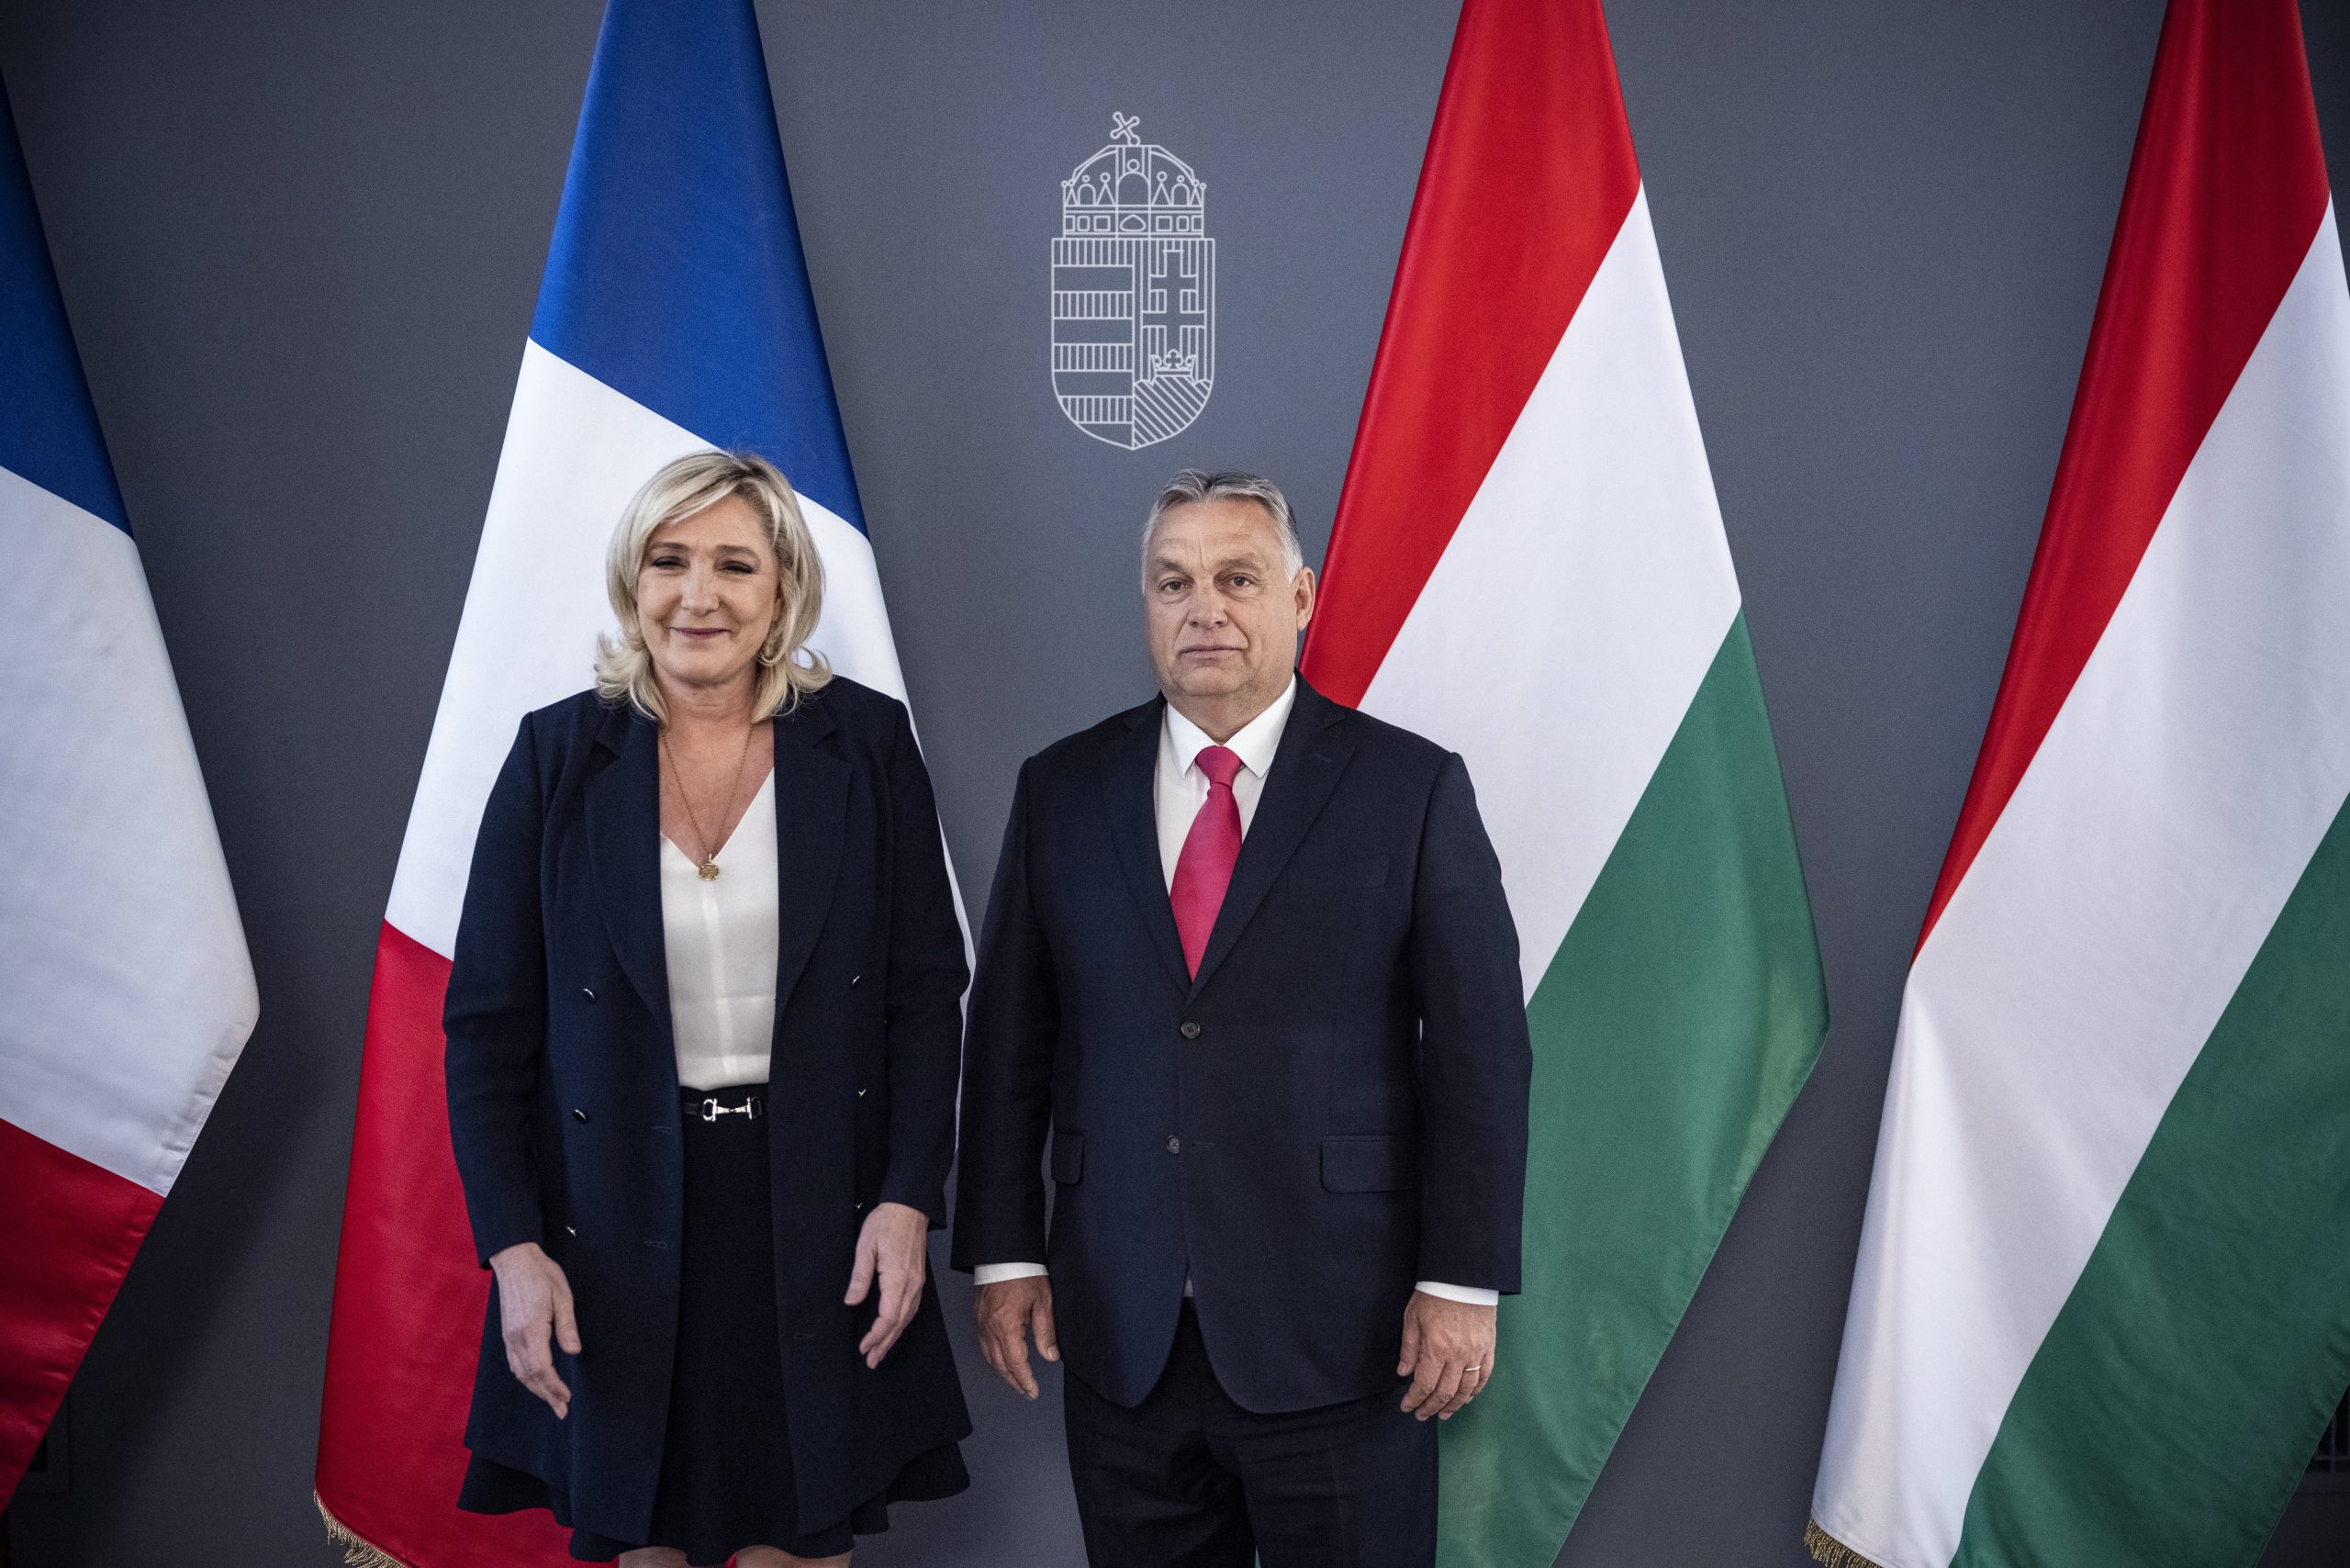 Le Pen Wants New 'Strong Group' with Orbán as 'Decisive Leader' in the EP